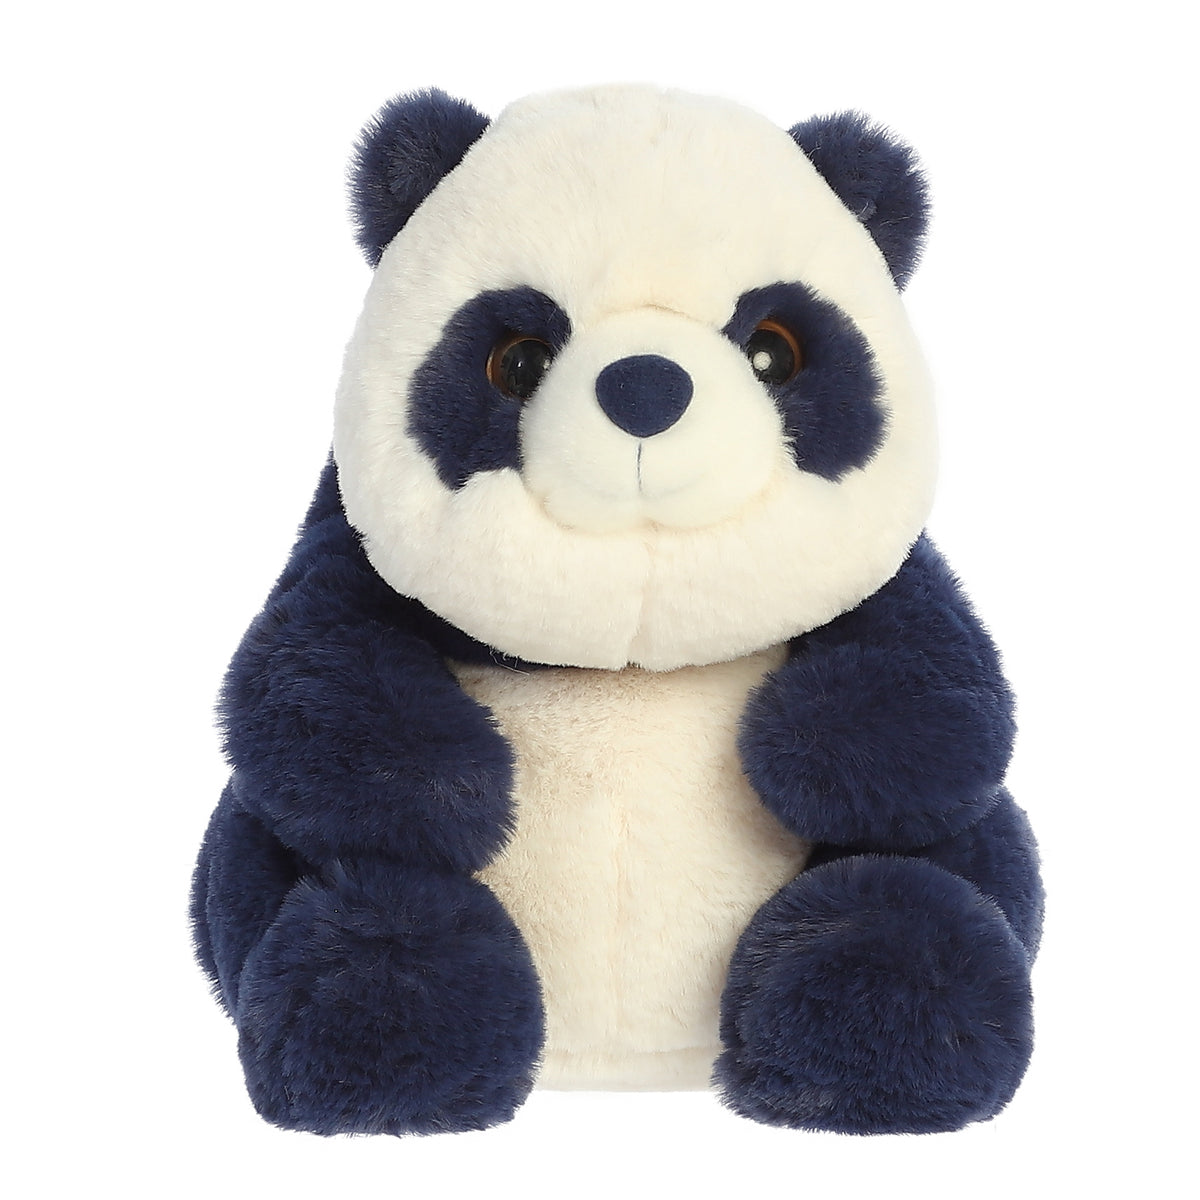 A medium-sized panda stuffed animal that strays from the traditional black and white with its rich navy fur coloring.